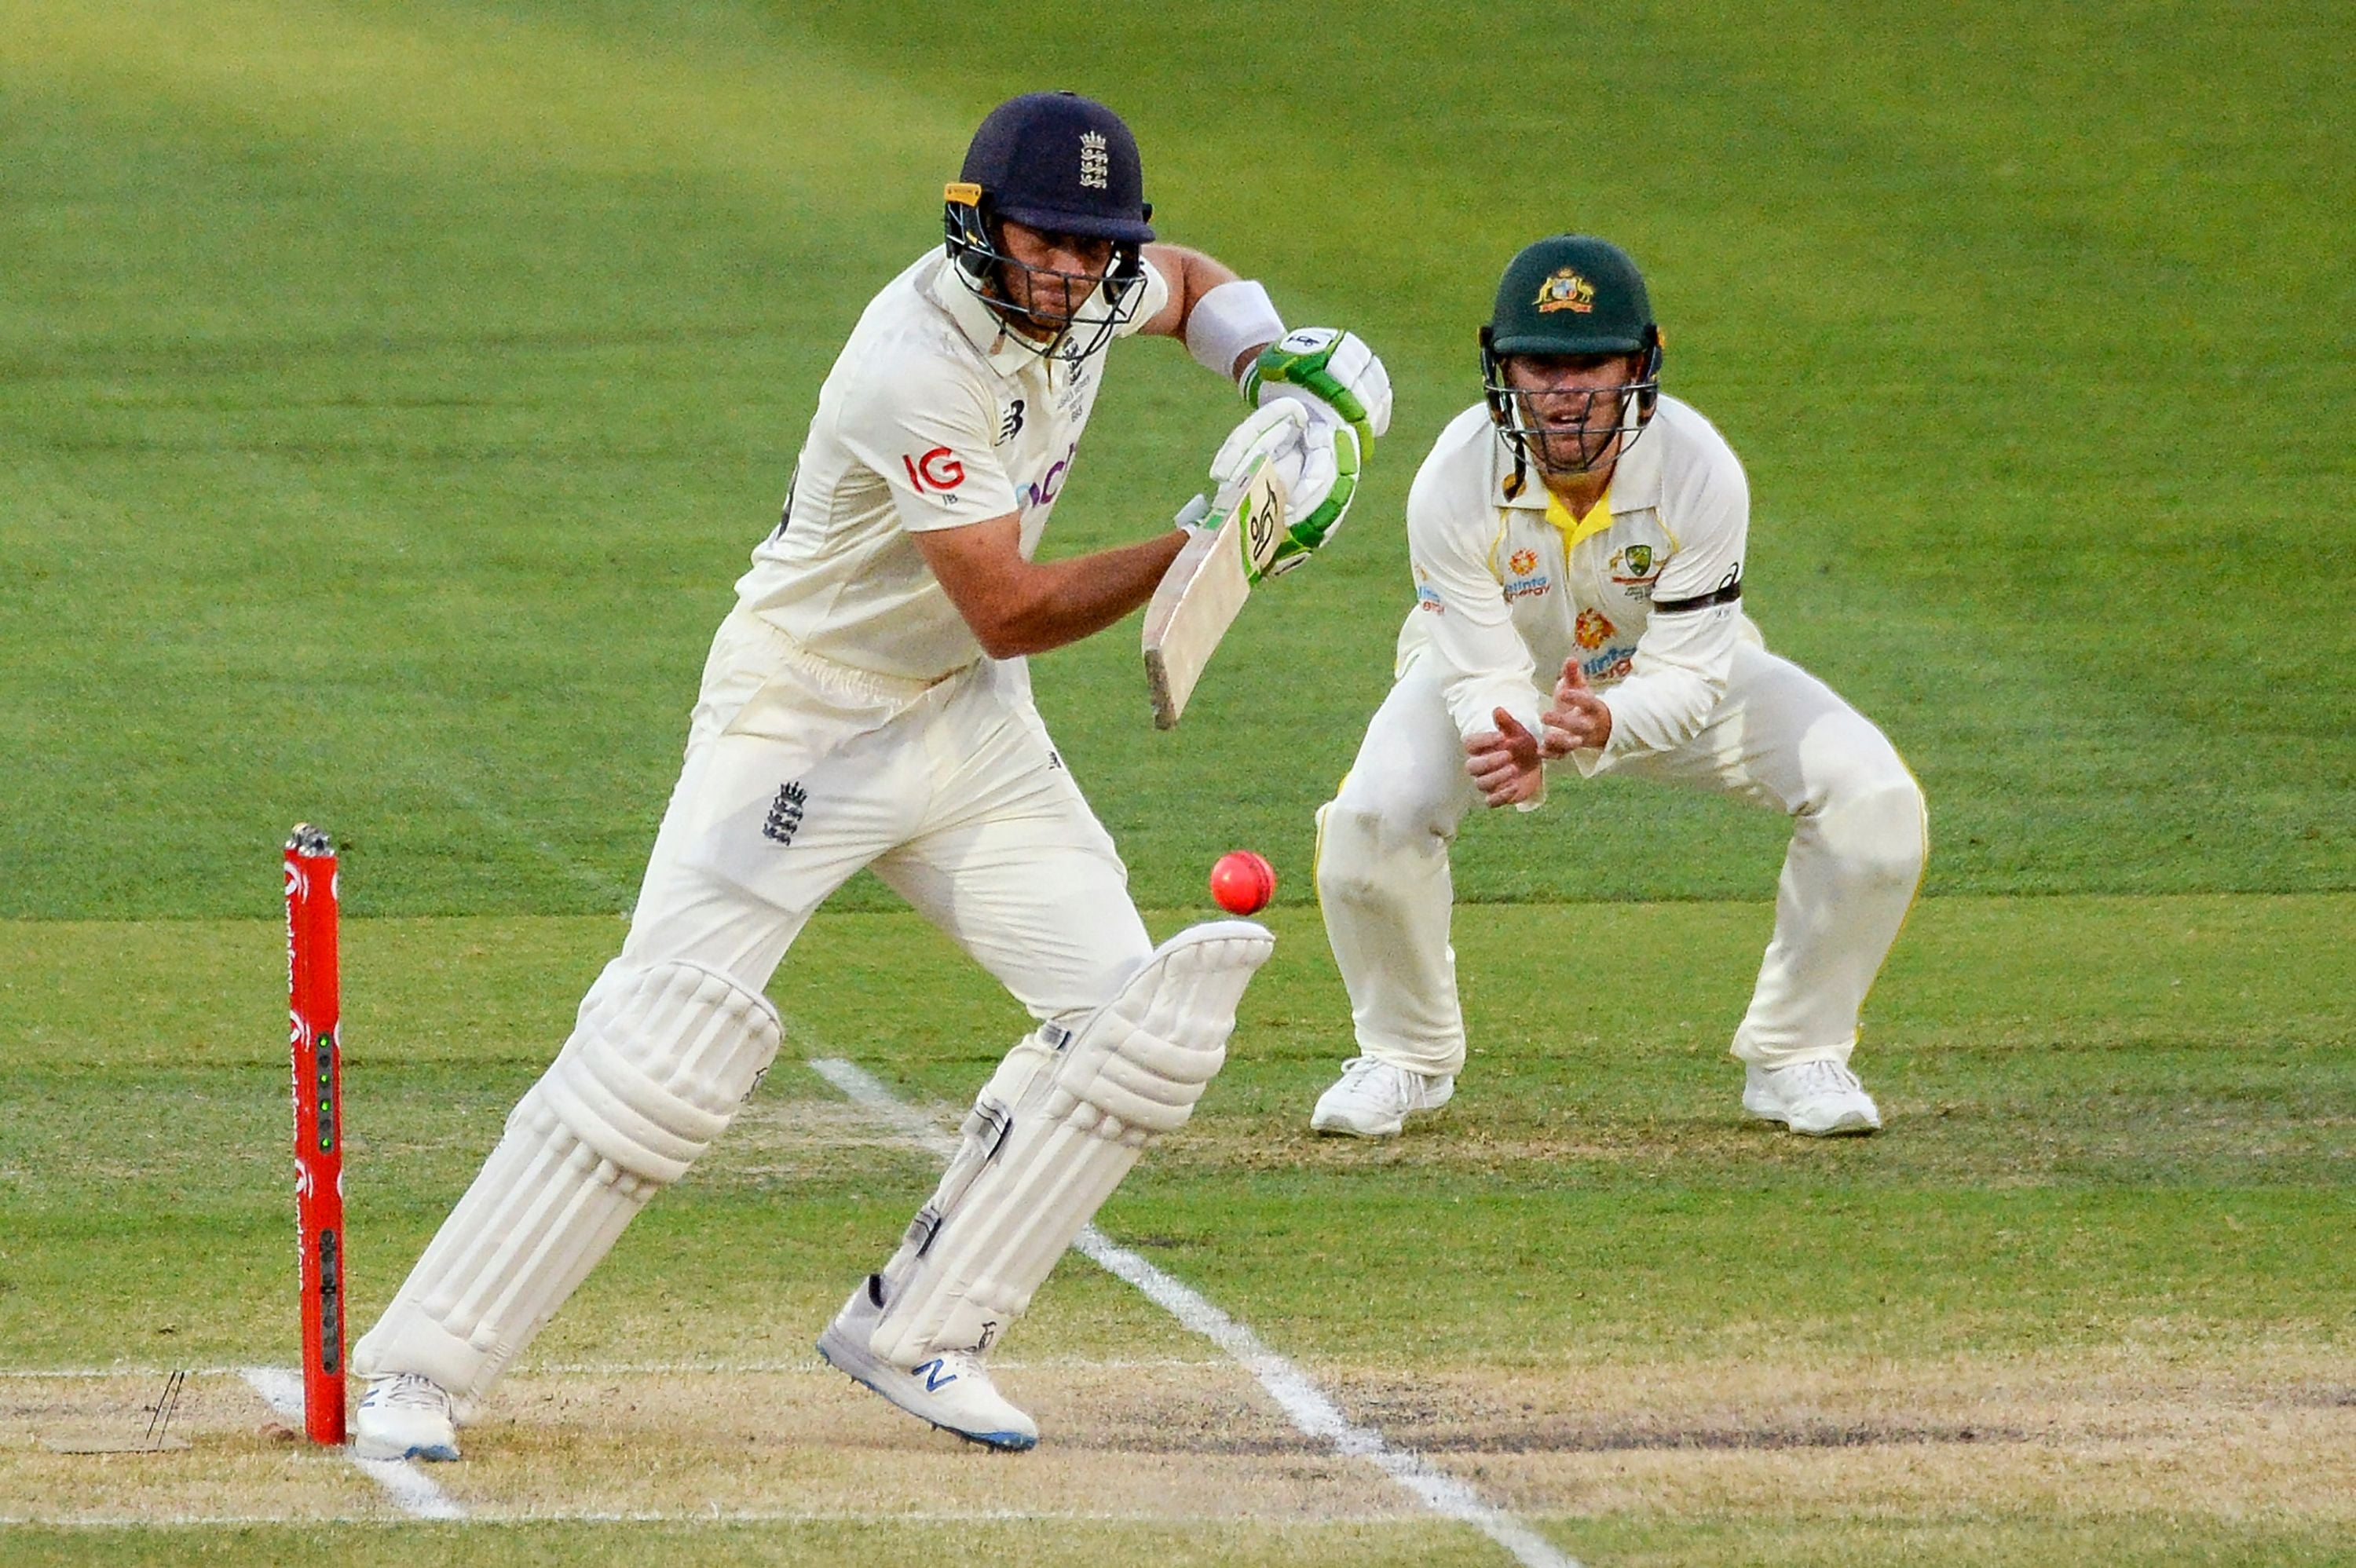 Buttler faced 206 balls in Adelaide before stepping back onto his stumps